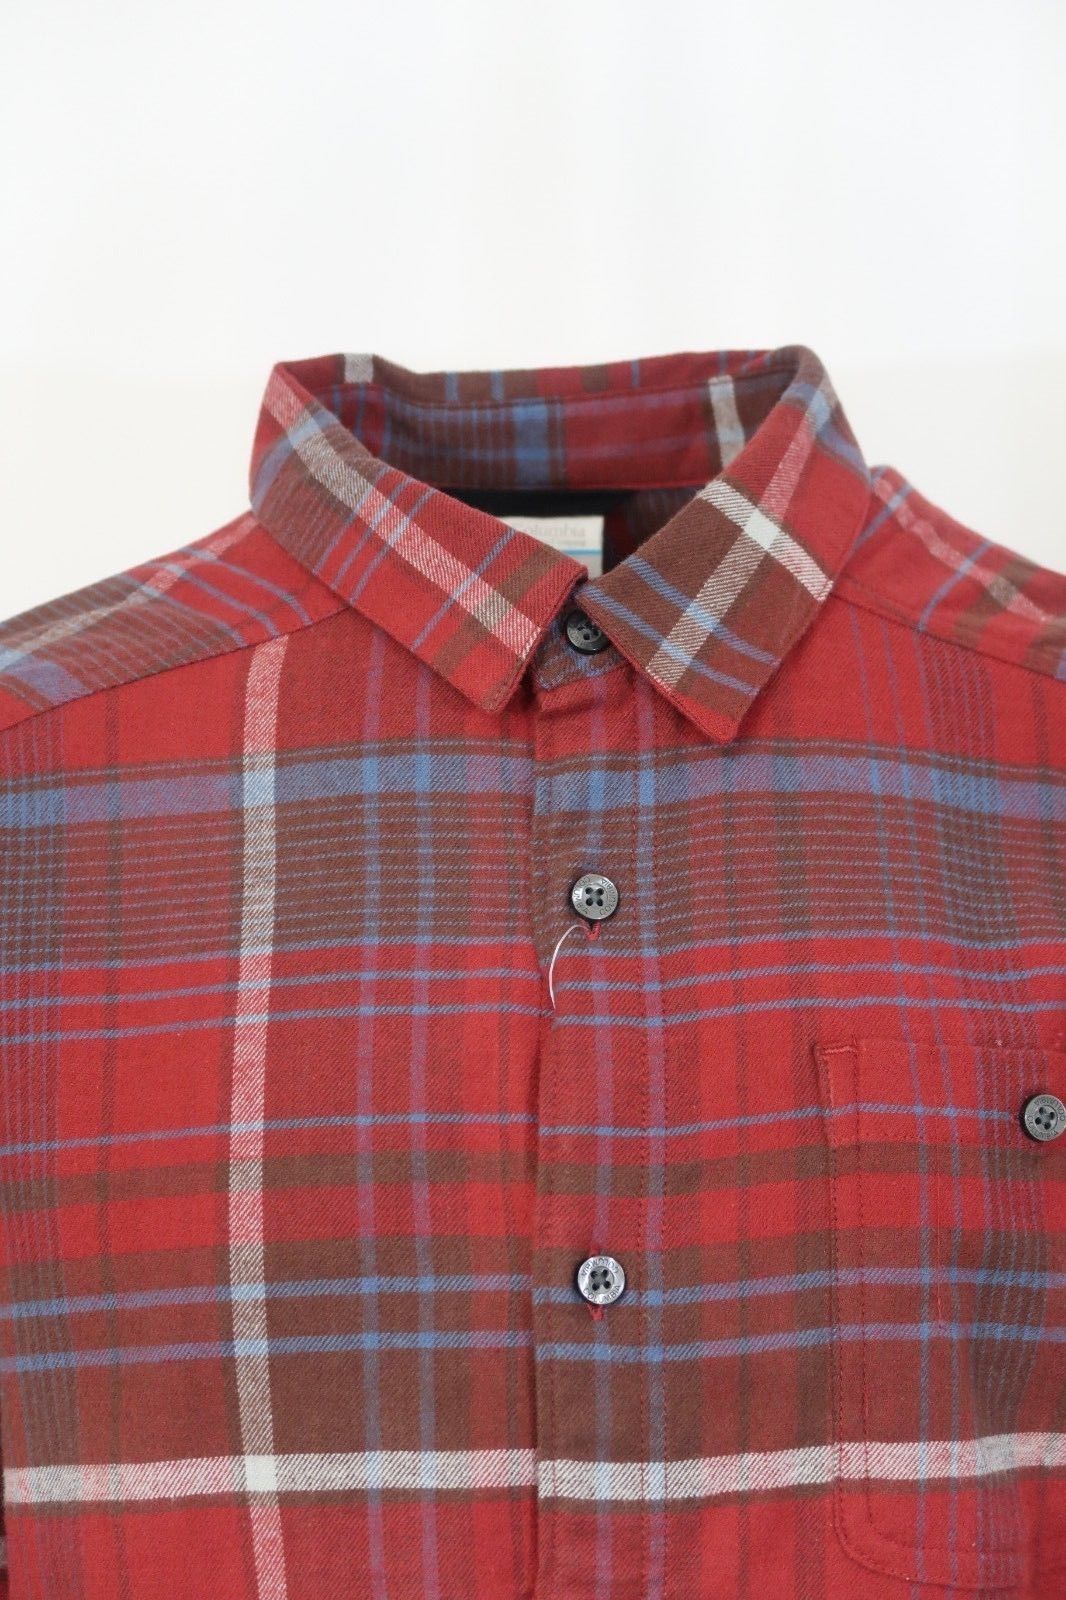 Columbia Men's Red Element Cornell Woods L/S Flannel (Retail $60)